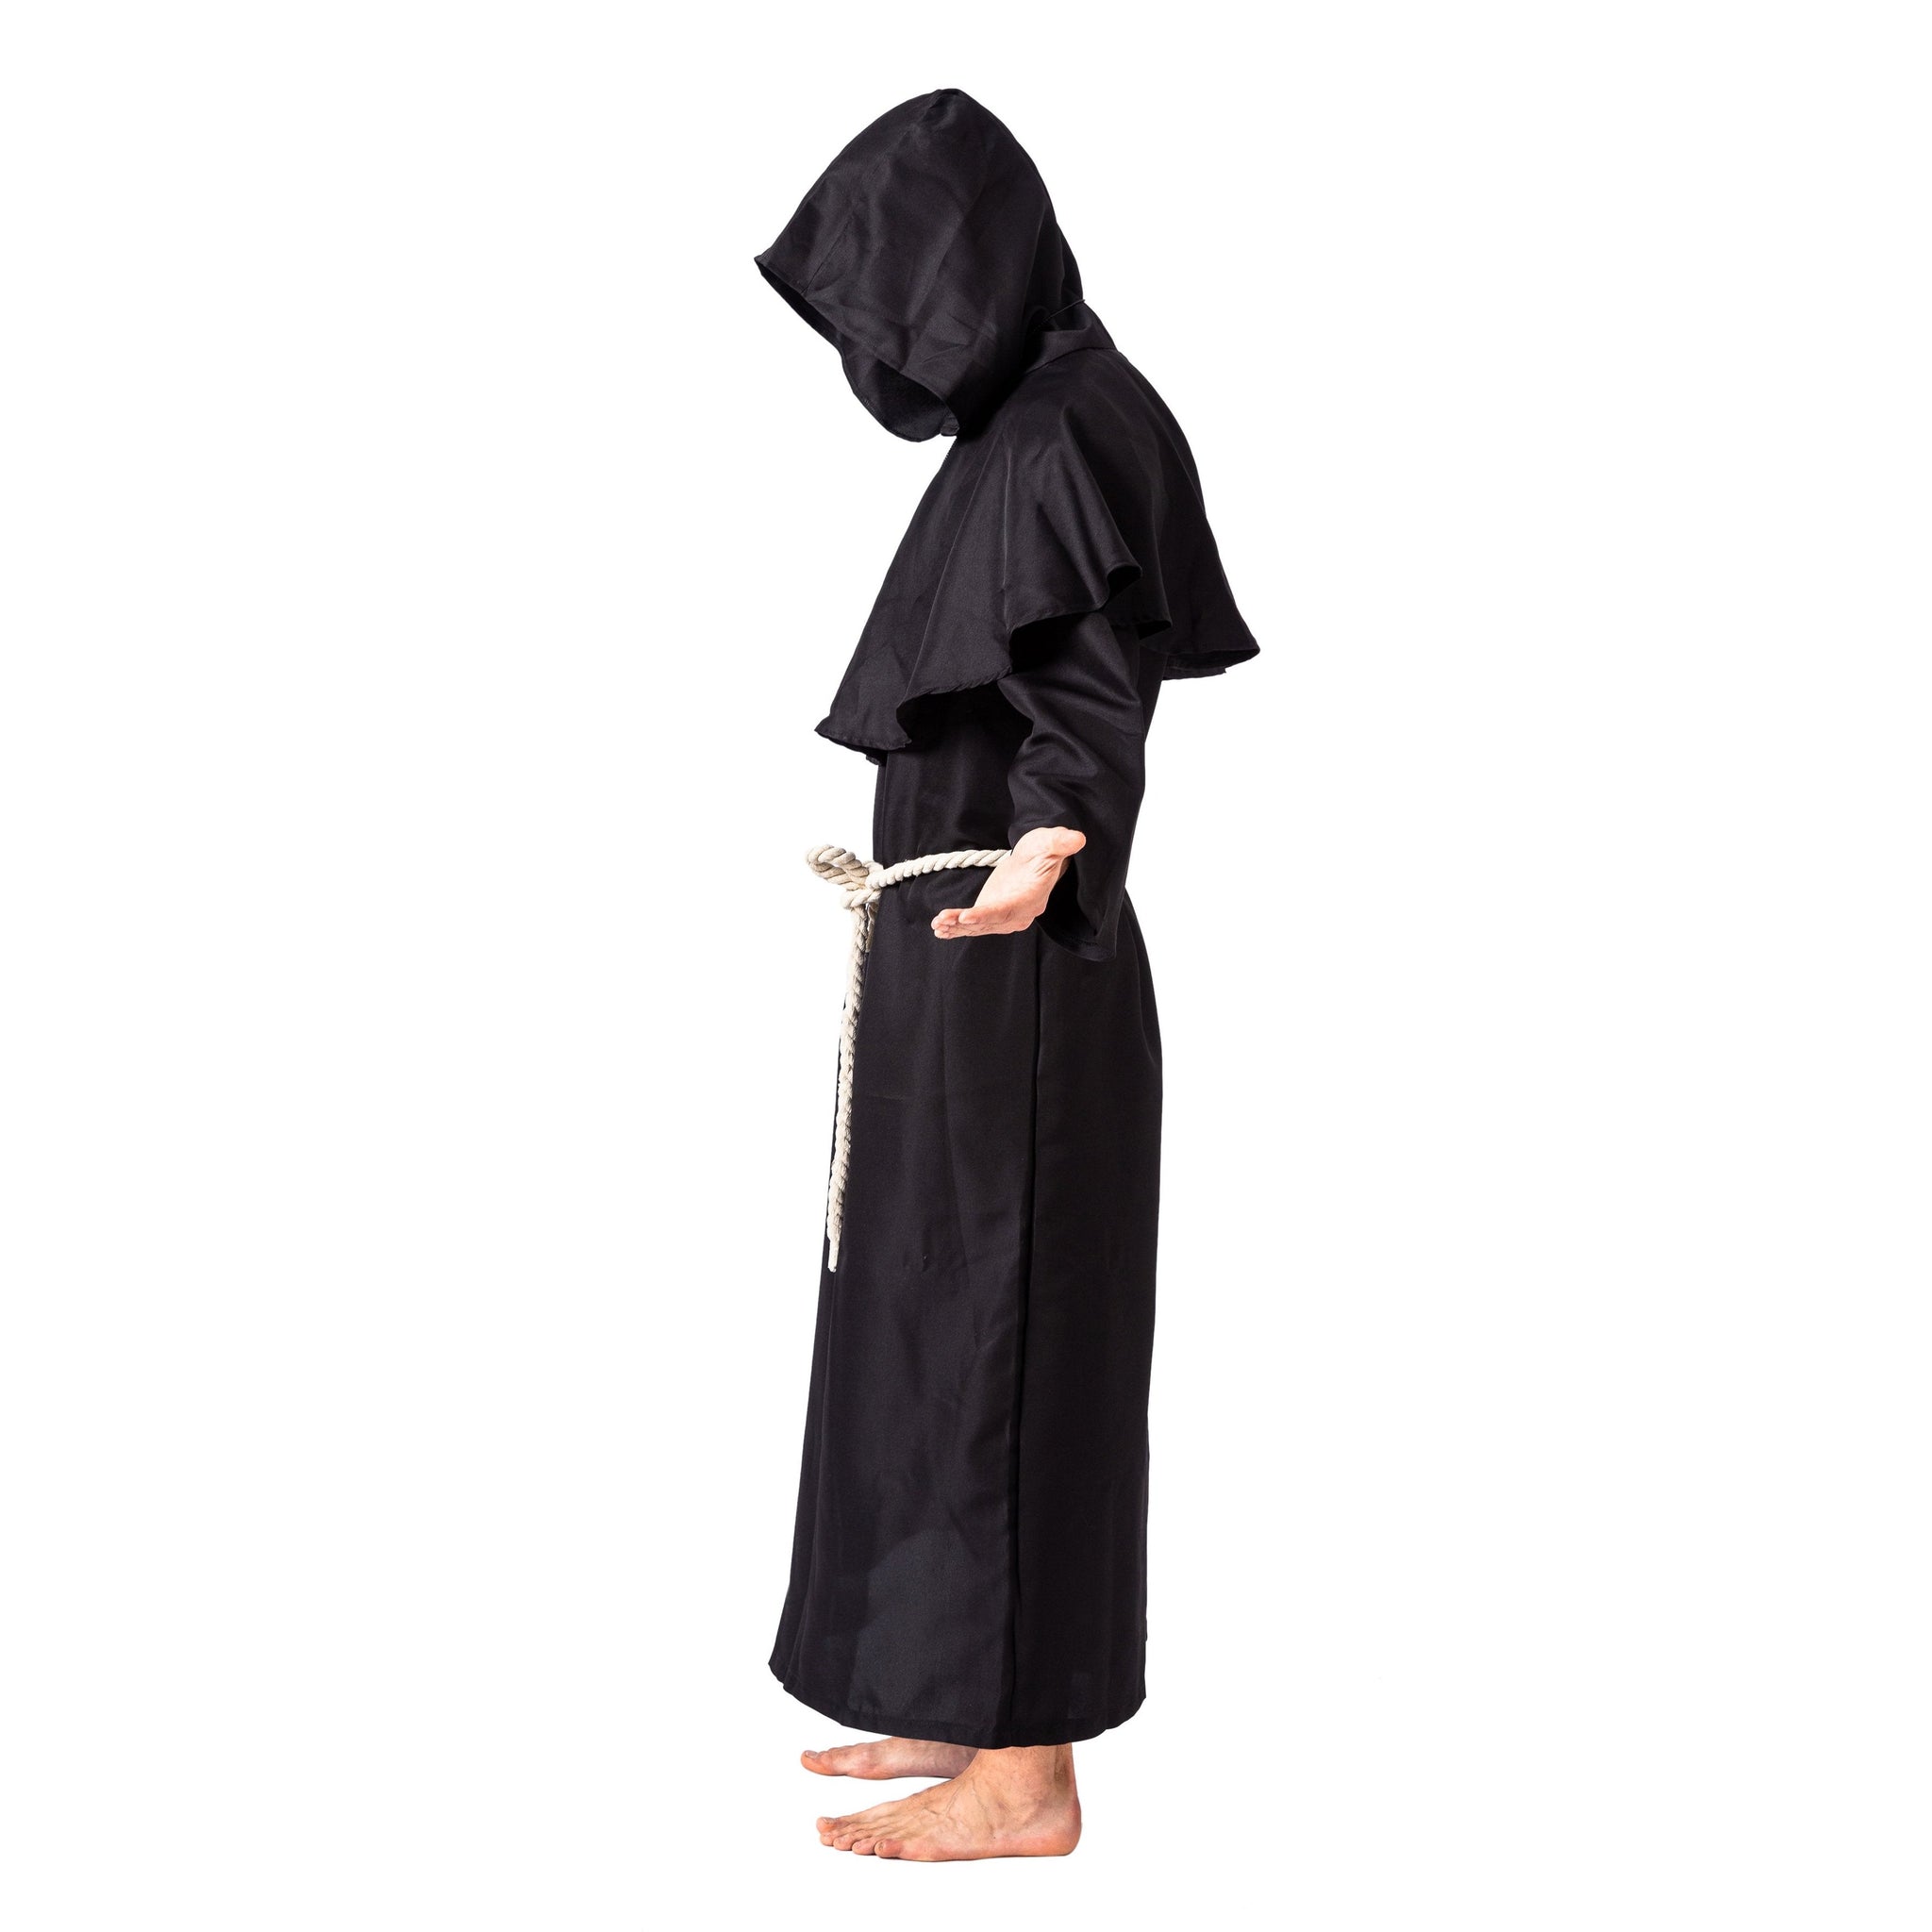 Adult Medieval Monk Hooded Robe Costume